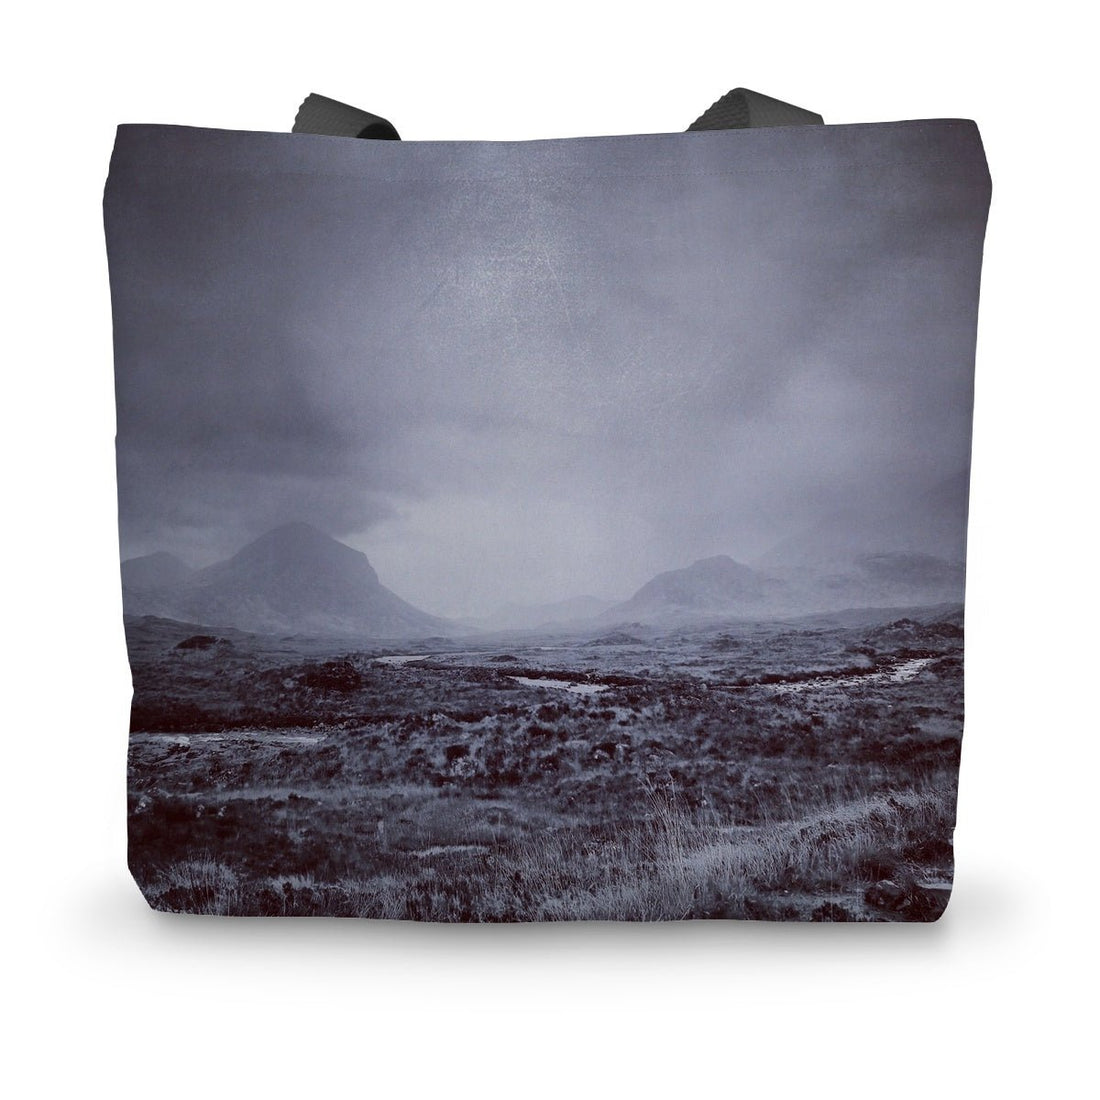 The Brooding Cuillin Skye Art Gifts Canvas Tote Bag